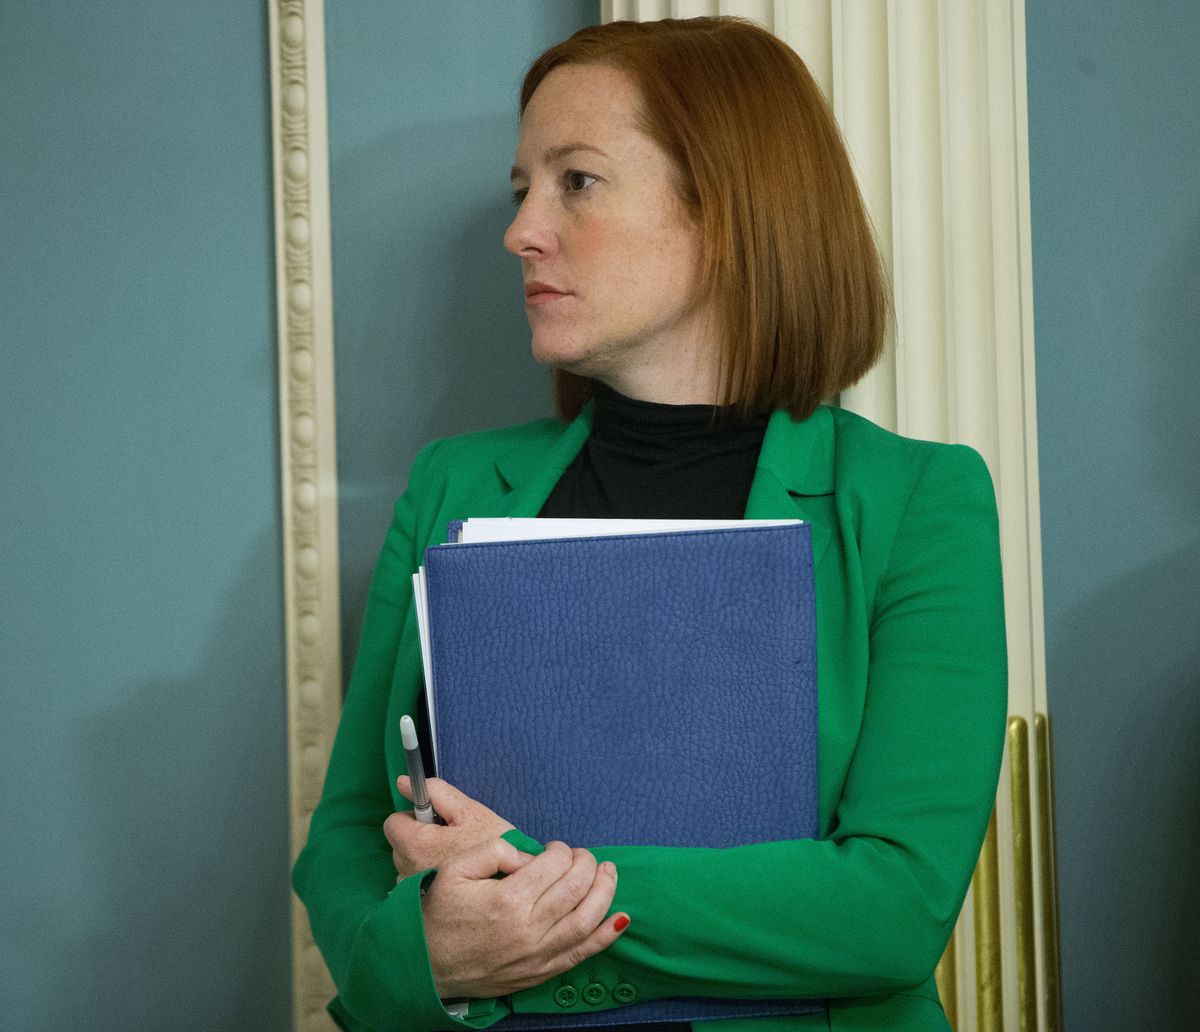 State Department spokeswoman Jen Psaki stands in on a meeting in Washington, Friday, Feb. 27, 2015. President-elect Joe Biden will have an all-female communications team at his White House, led by campaign communications director Kate Bedingfield. Jen Psaki will be his press secretary.  (Pablo Martinez Monsivais)